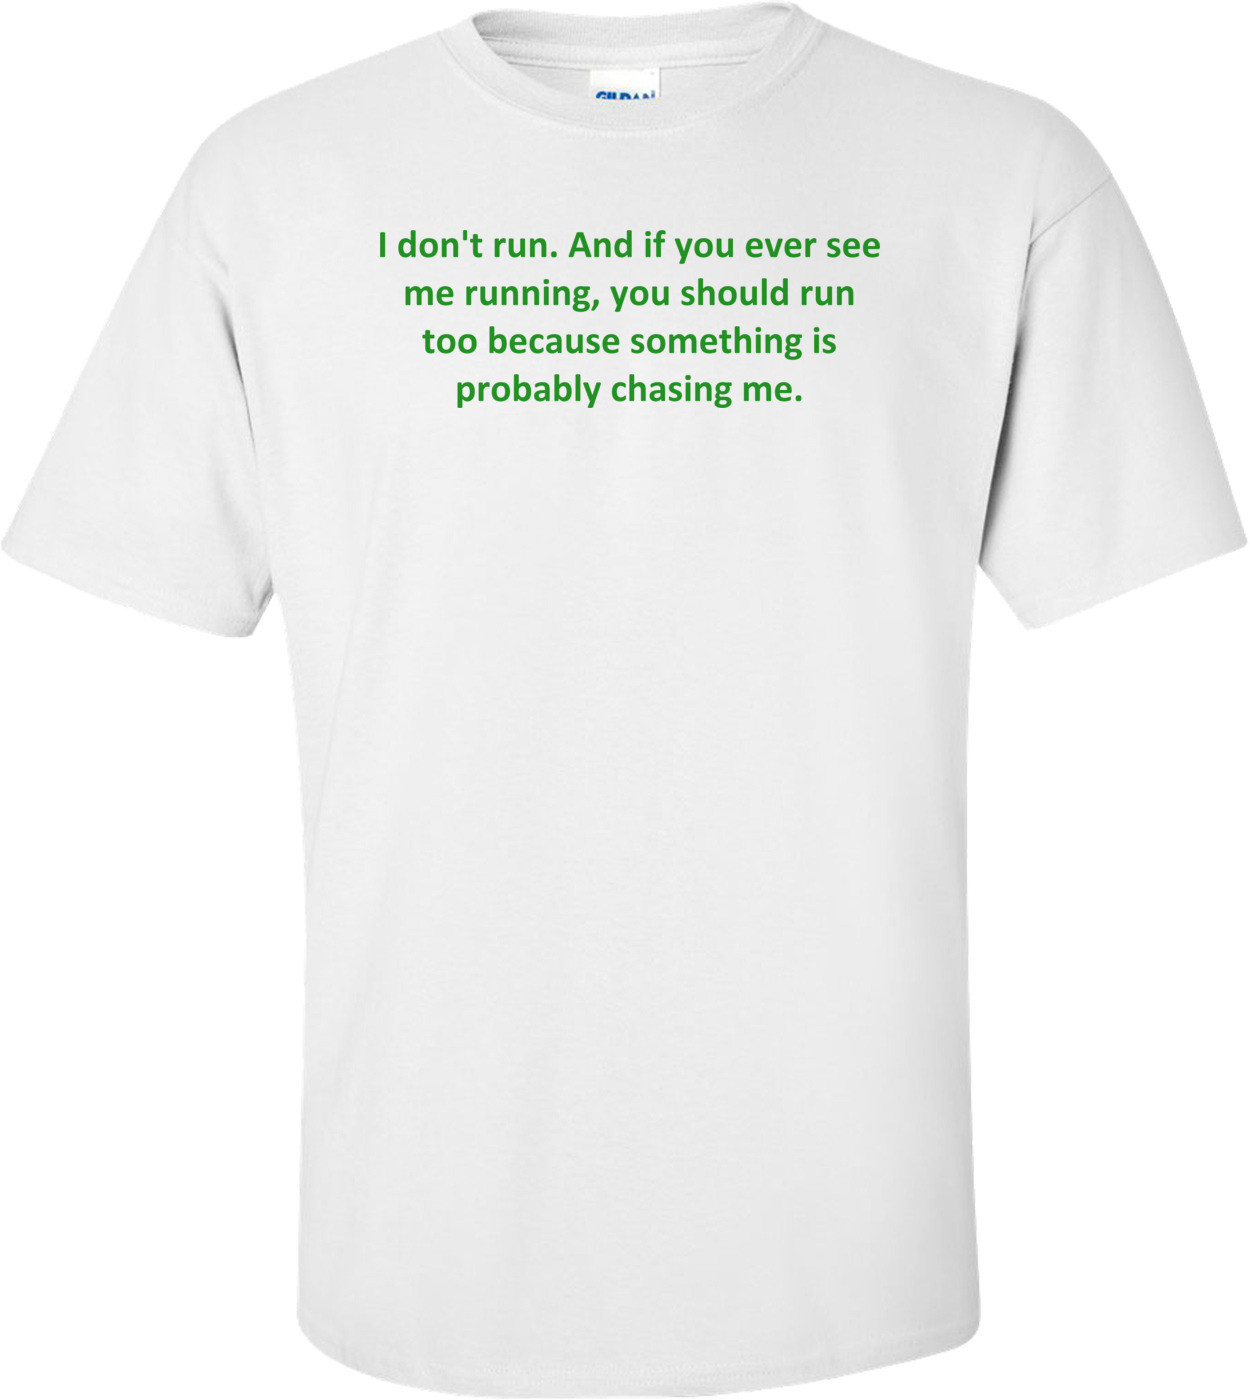 I don't run. And if you ever see me running, you should run too because something is probably chasing me. Shirt